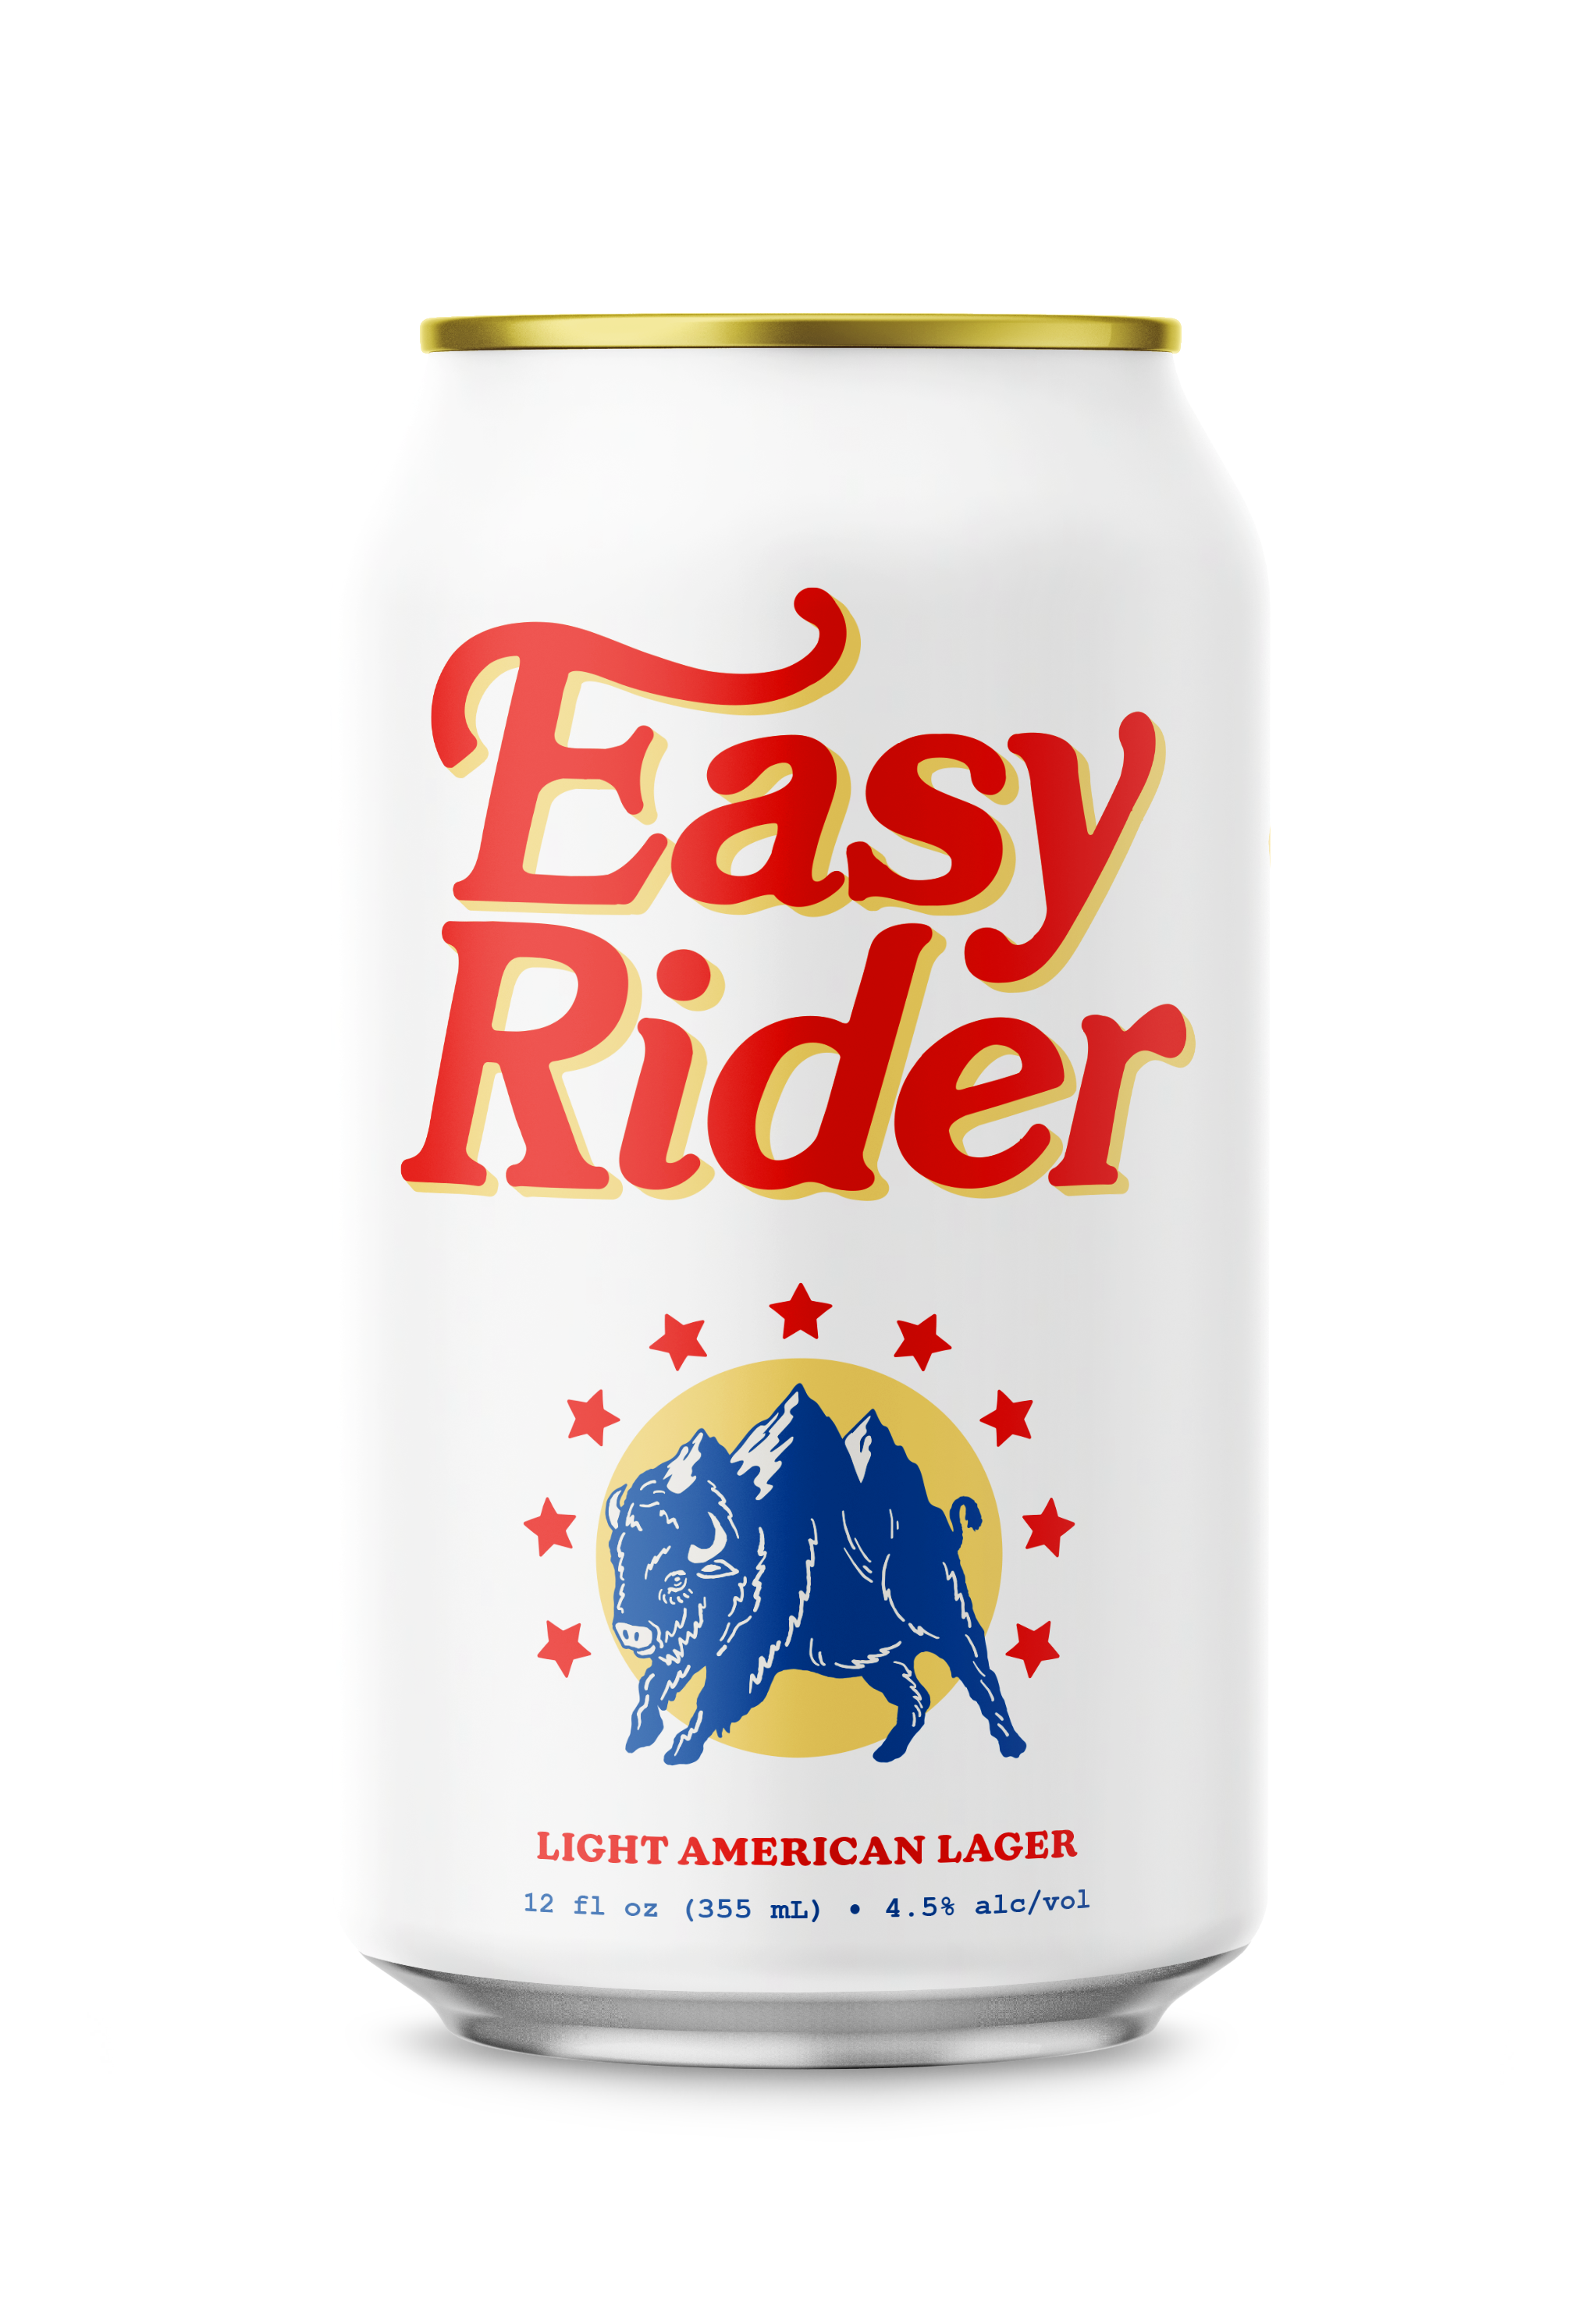 A can of Easy Rider beer